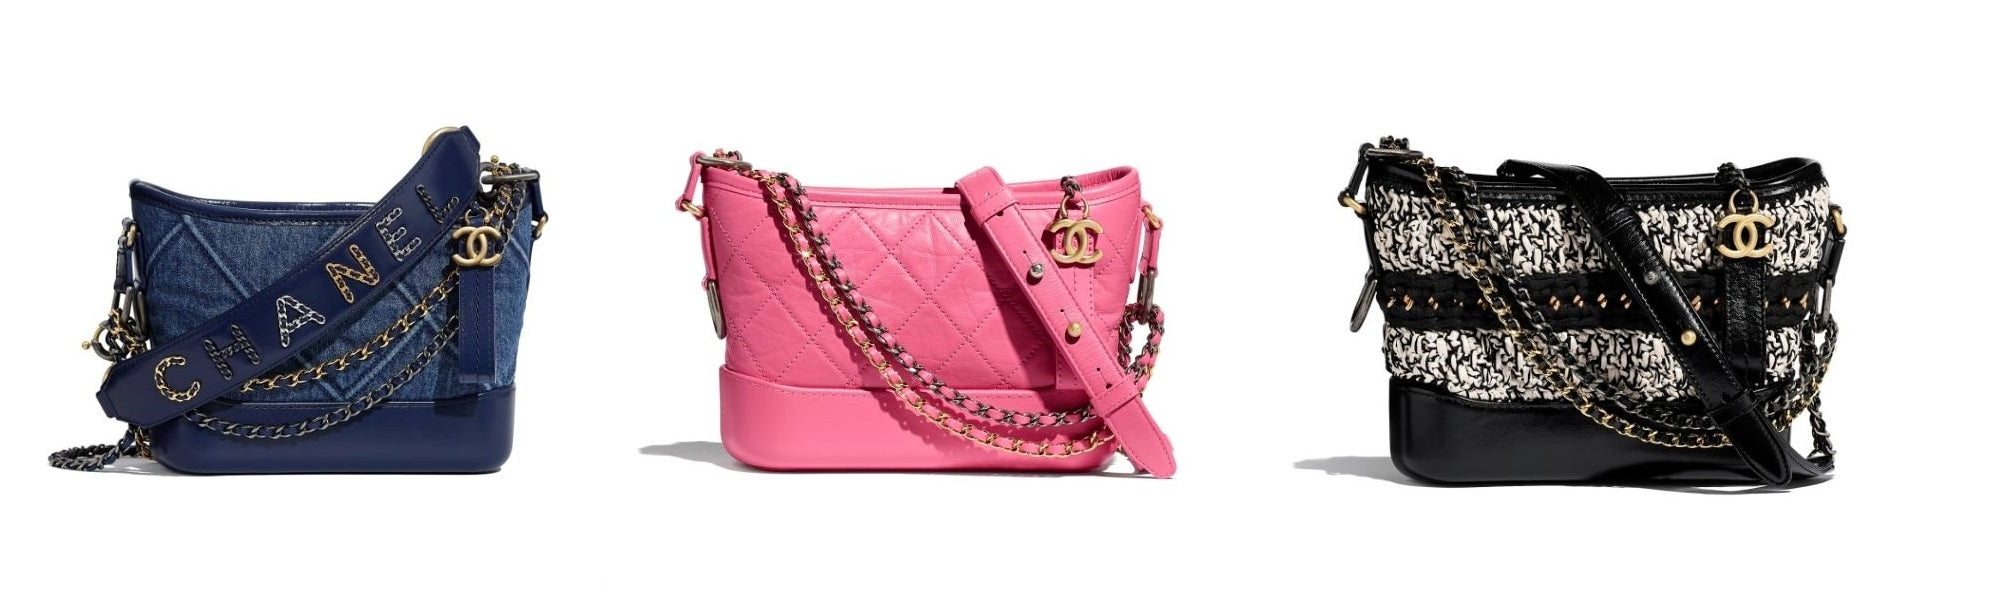 Chanel Fall/Winter 2021 Bag Collection: Styles and Prices chanel gabrielle hobo bag